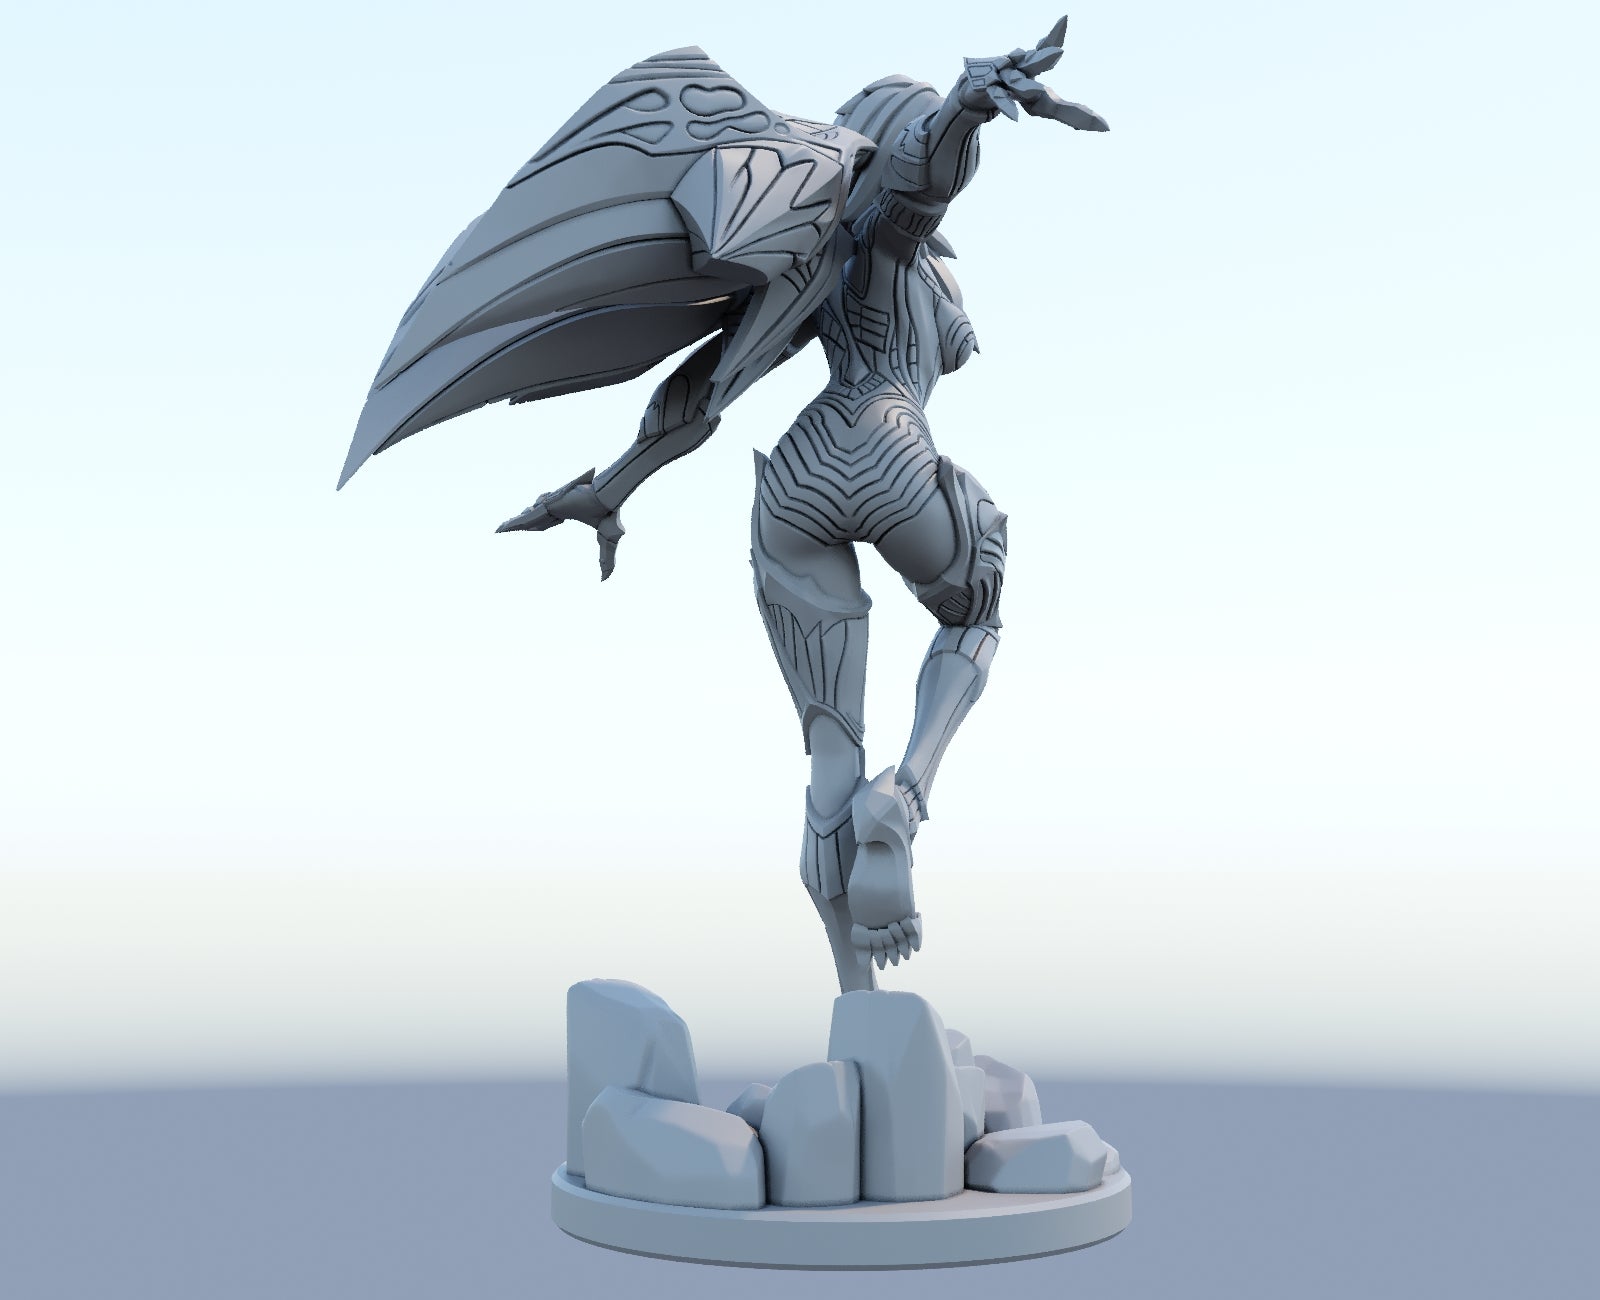 Kaisa 3D-printed League of Legends champion figure. Decorate your gaming setup or home with your favorite League of Legends champion! Choose between the unpainted version, perfect for you to paint yourself, or the hand-painted version by a professional painter. Order your figure today!